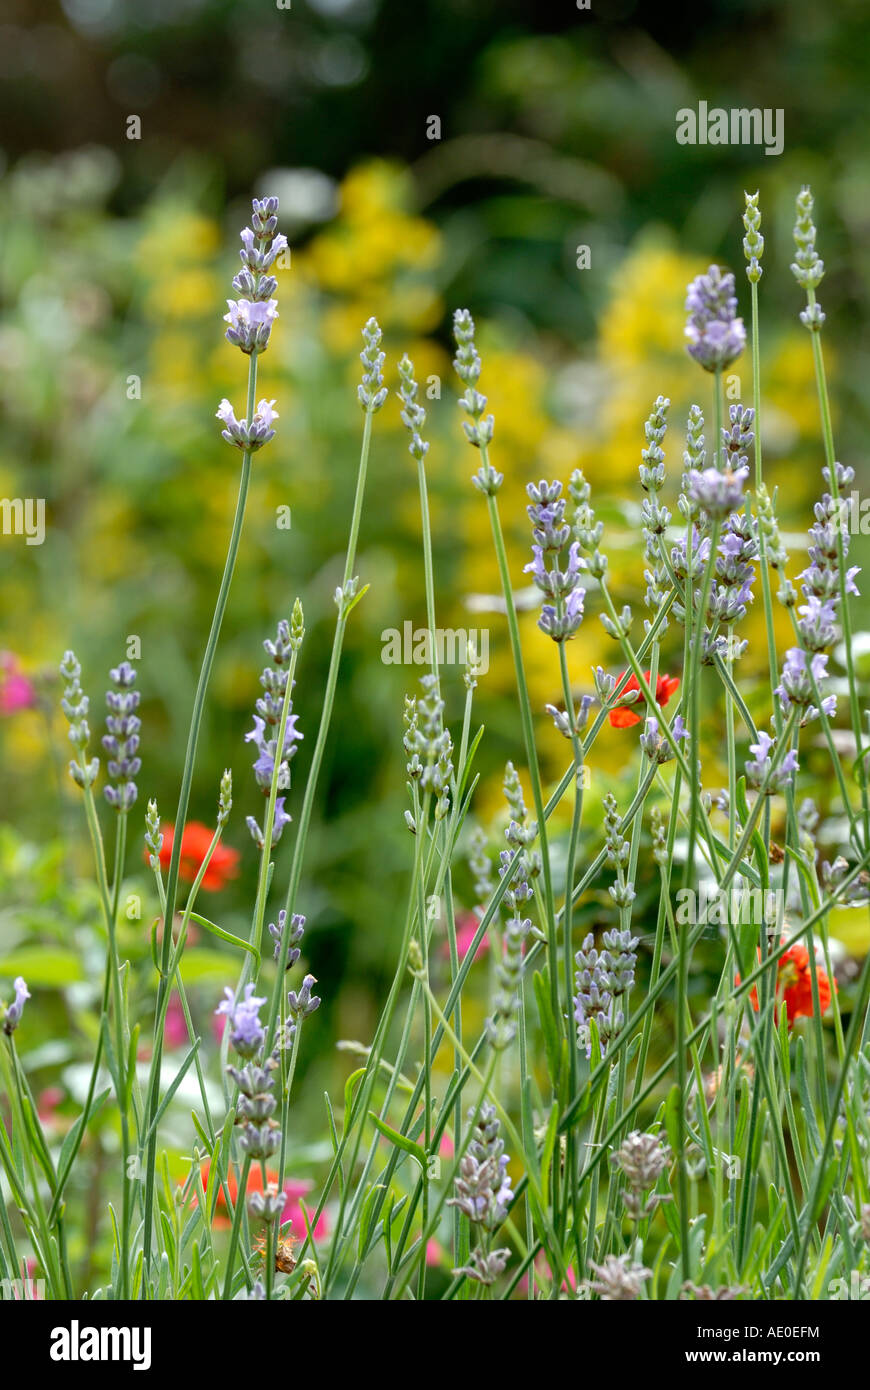 Cottage Garden Flowers, Lavender, Geum, Yellow Loosestrife Stock Photo